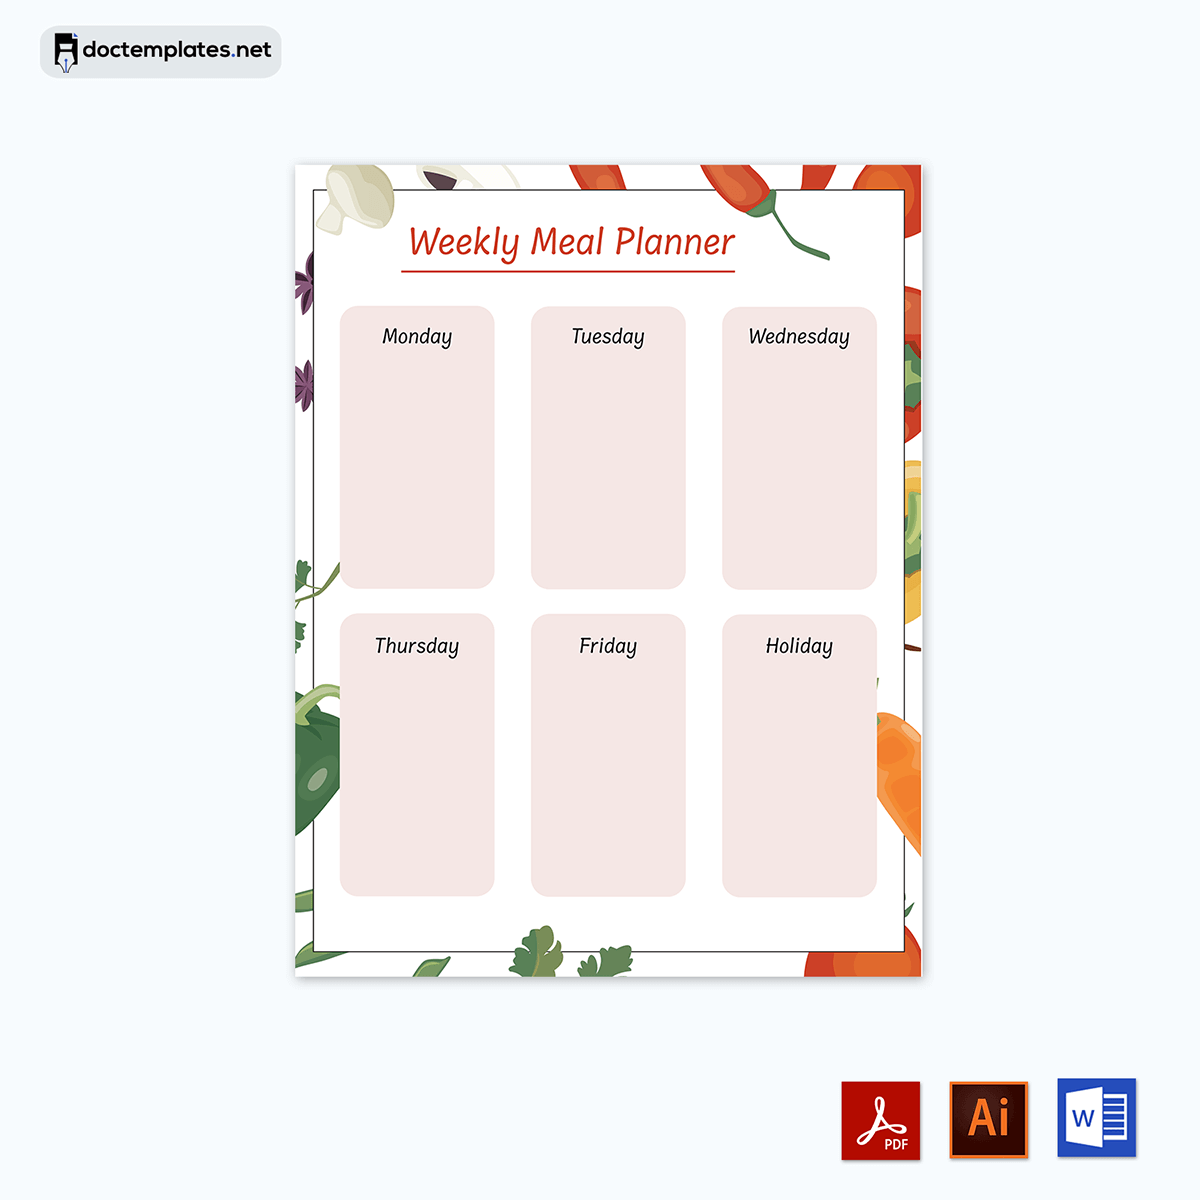 Stay on Track with an Exclusive Weekly Meal Planner